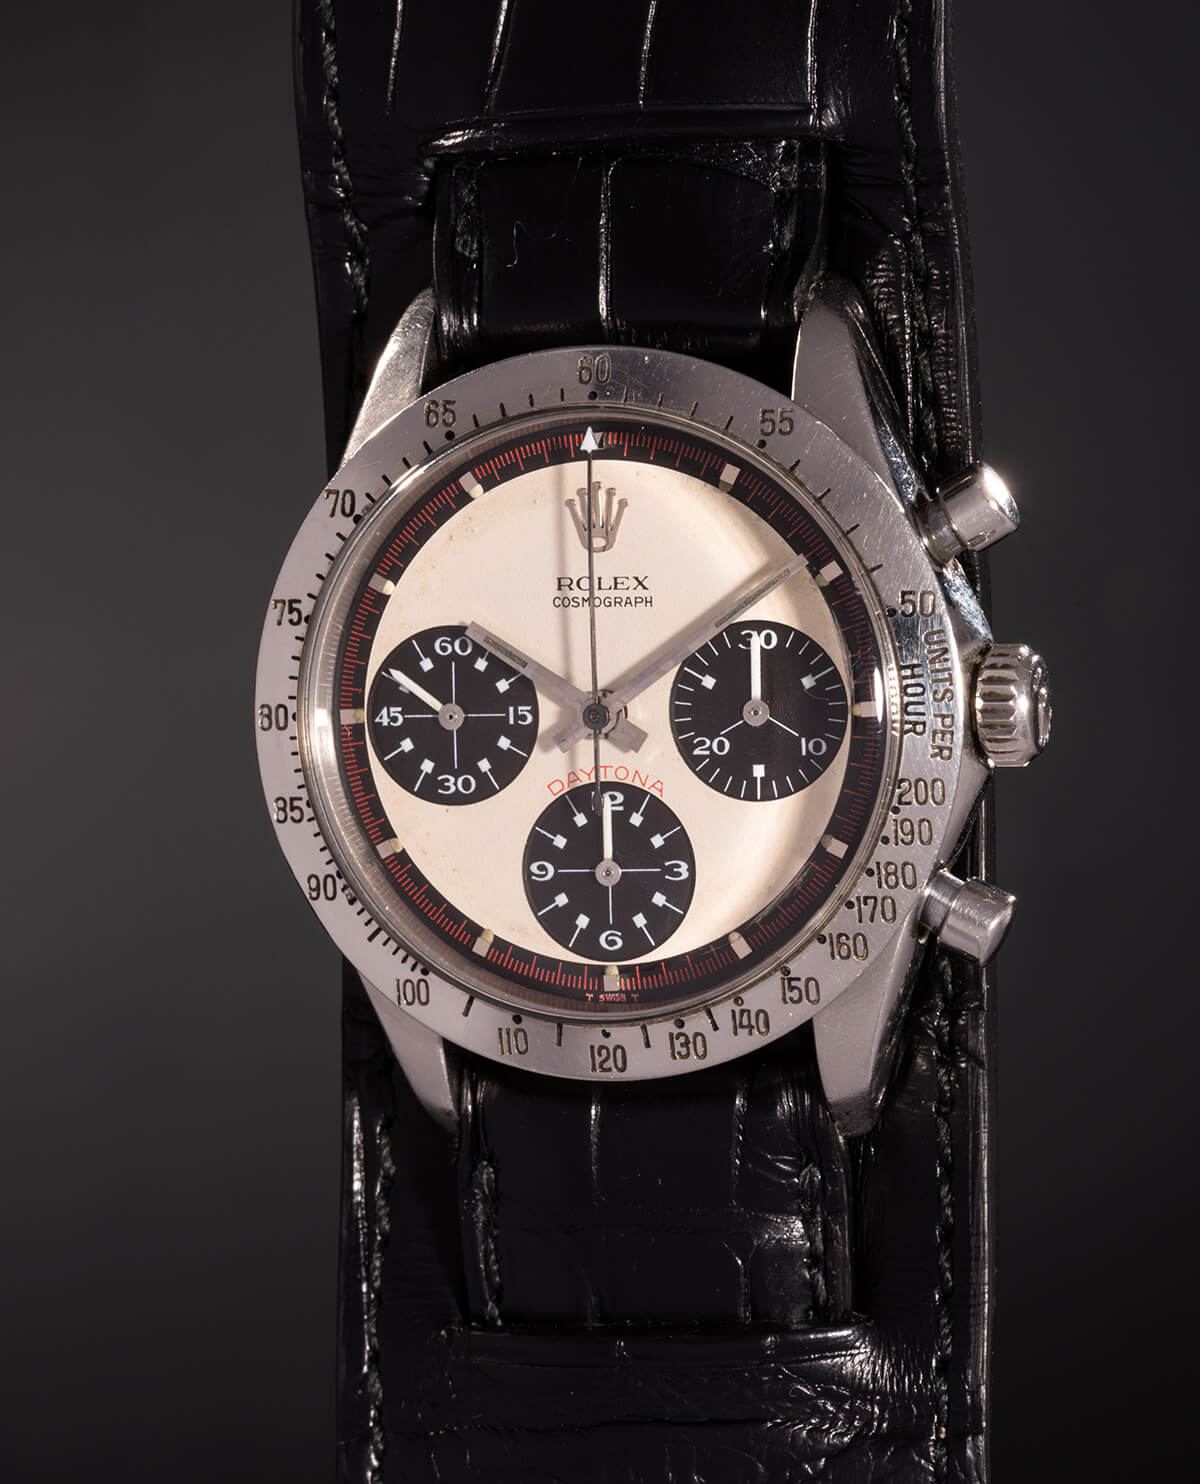 Paul Newman’s personal Rolex Daytona (photo courtesy Phillips/Bacs and Russo)